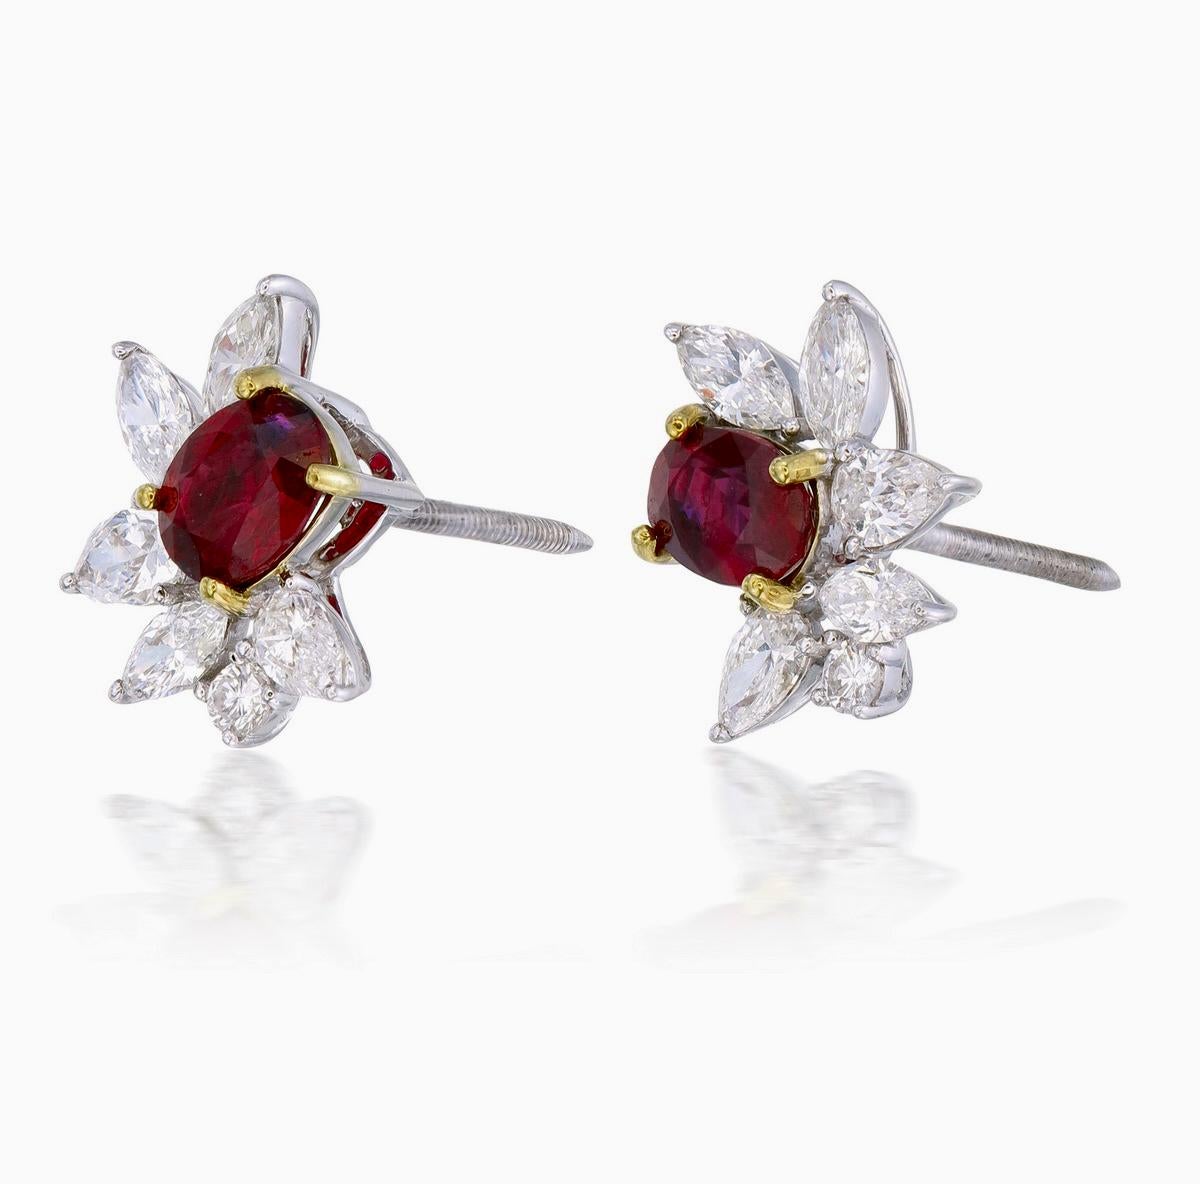 A pair of fine timeless ruby and diamond earrings made in 18 Karat gold. This pair of earrings embraces minimalism with its simple design while still displaying elegance; a great fit for lifestyle wear.

- There are two center oval Pigeon Blood